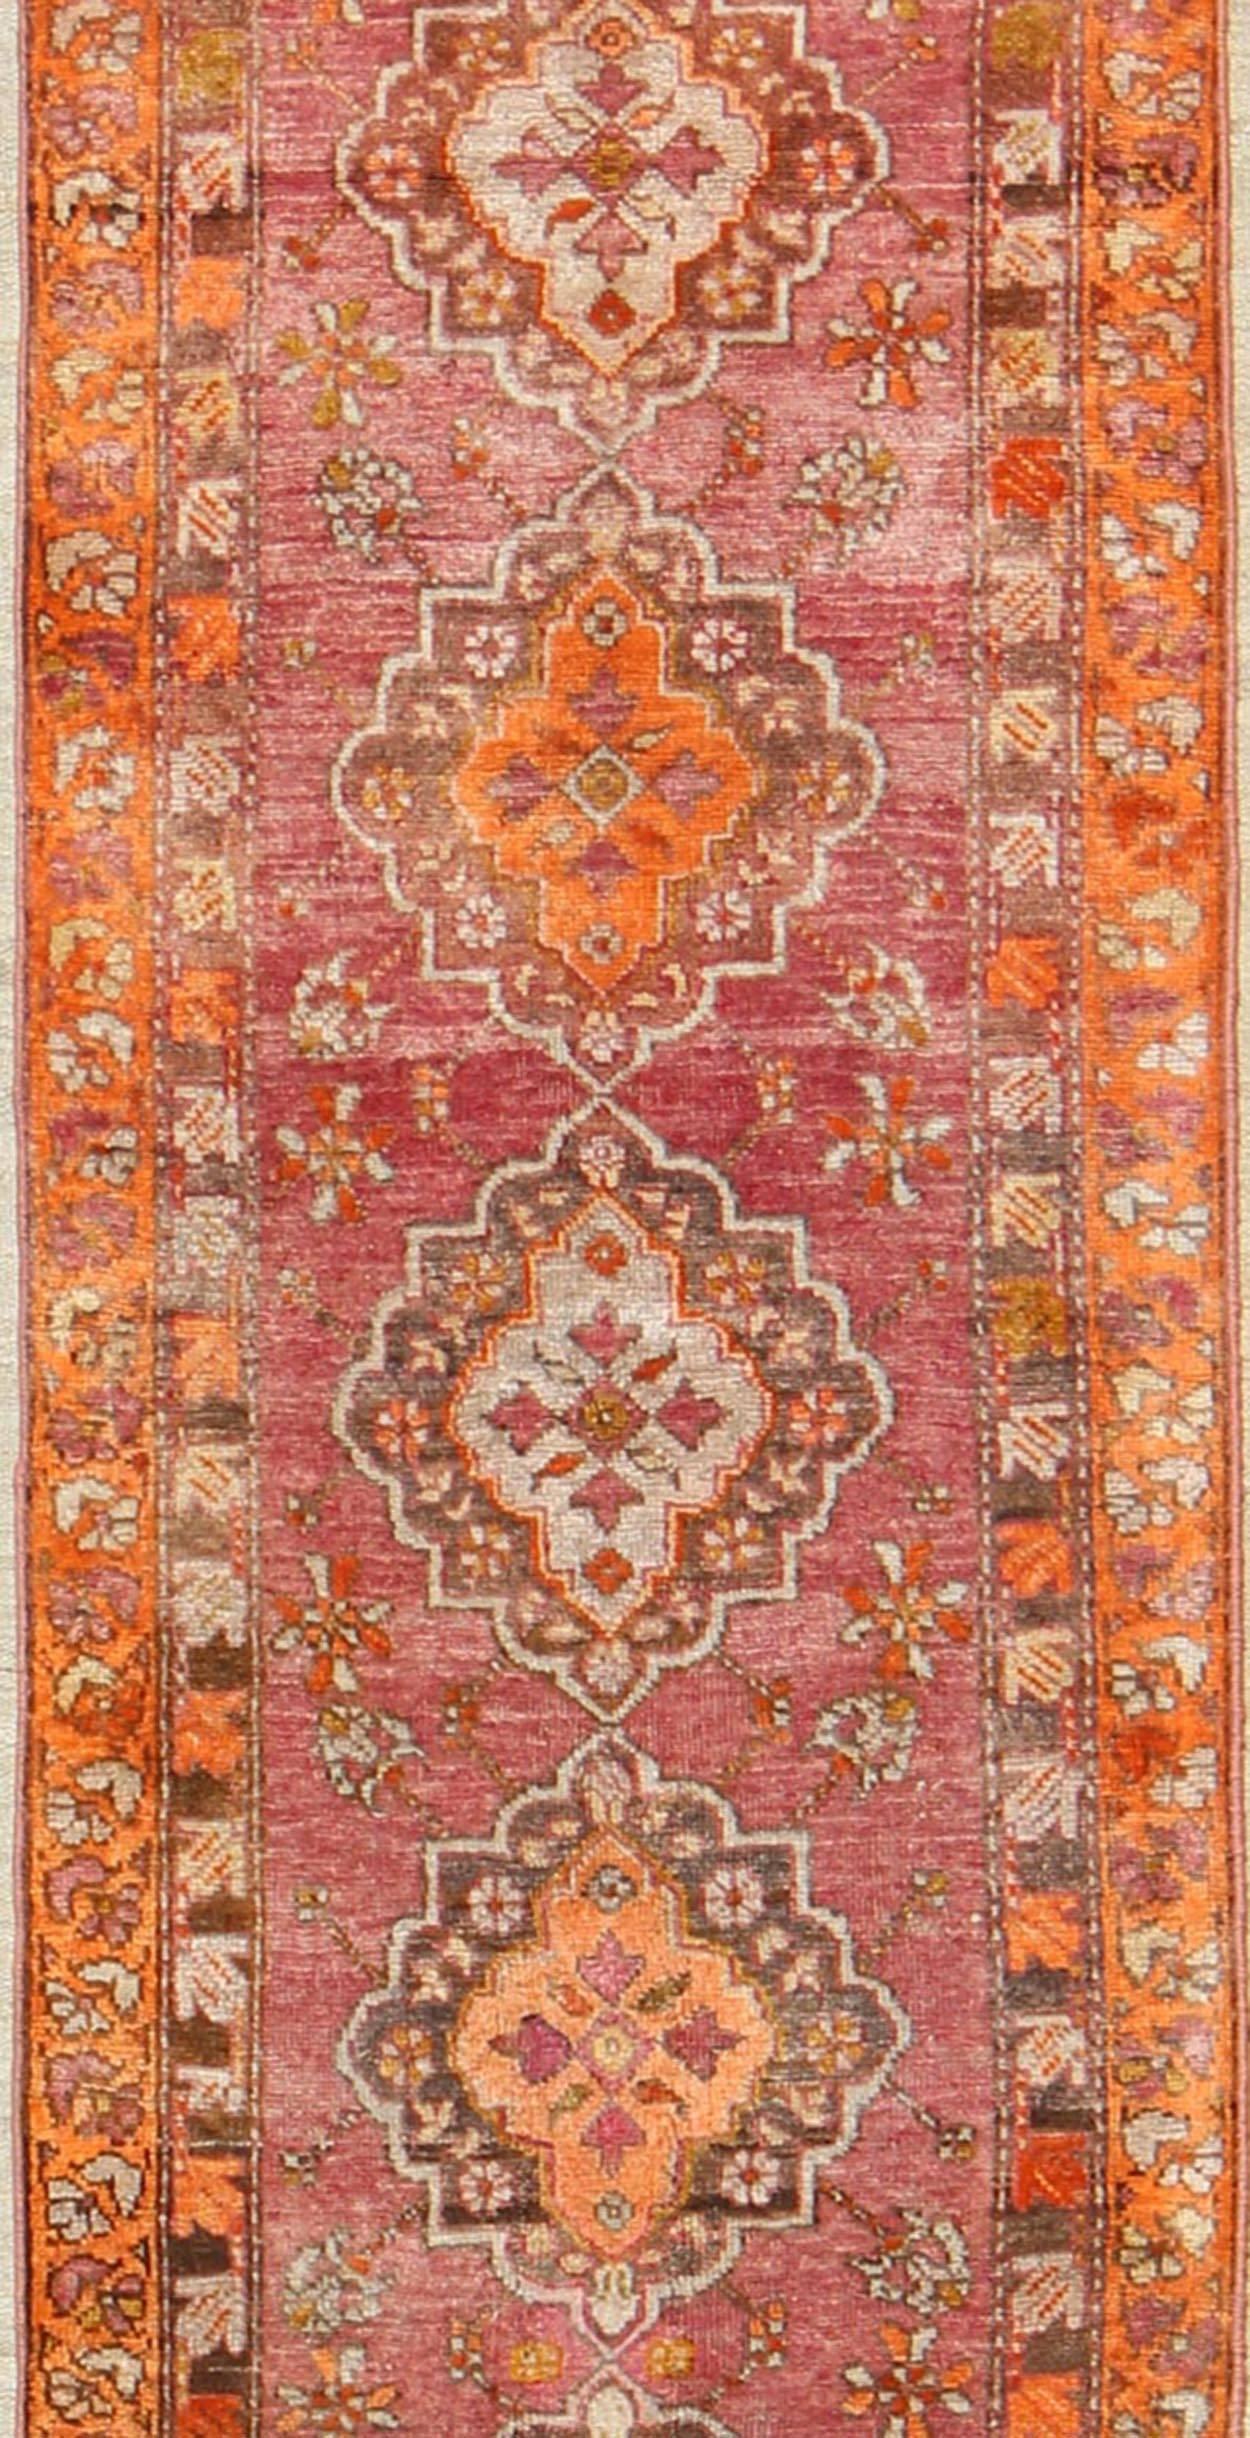 Antique Turkish Oushak Runner with Layered Floral Medallions and Ornate Borders In Excellent Condition For Sale In Atlanta, GA